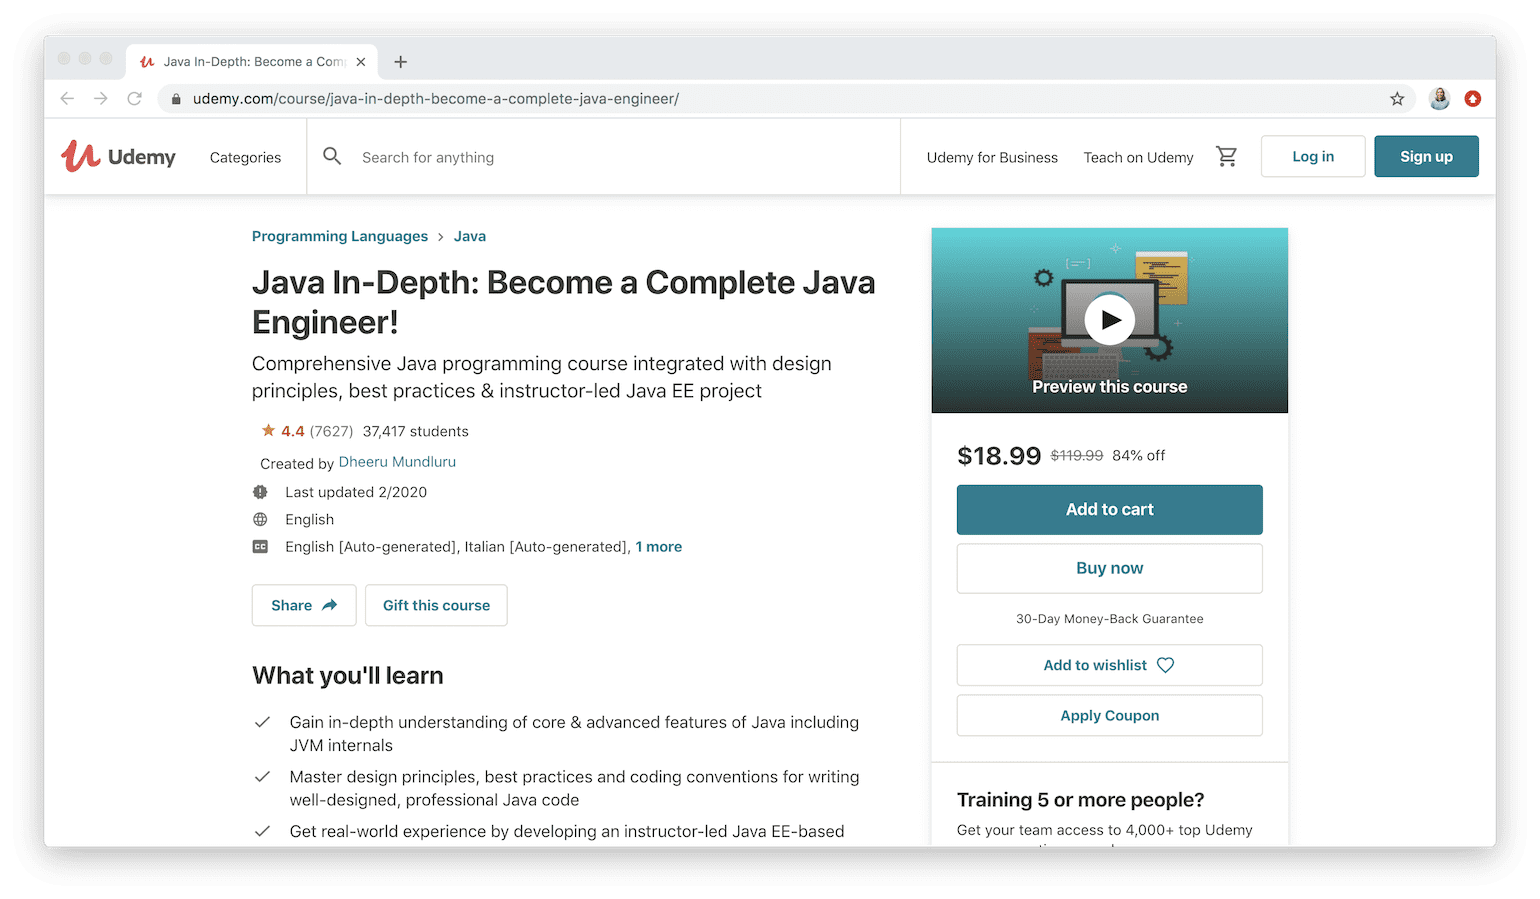 Java In-Depth: Become a Complete Java Engineer! on Udemy